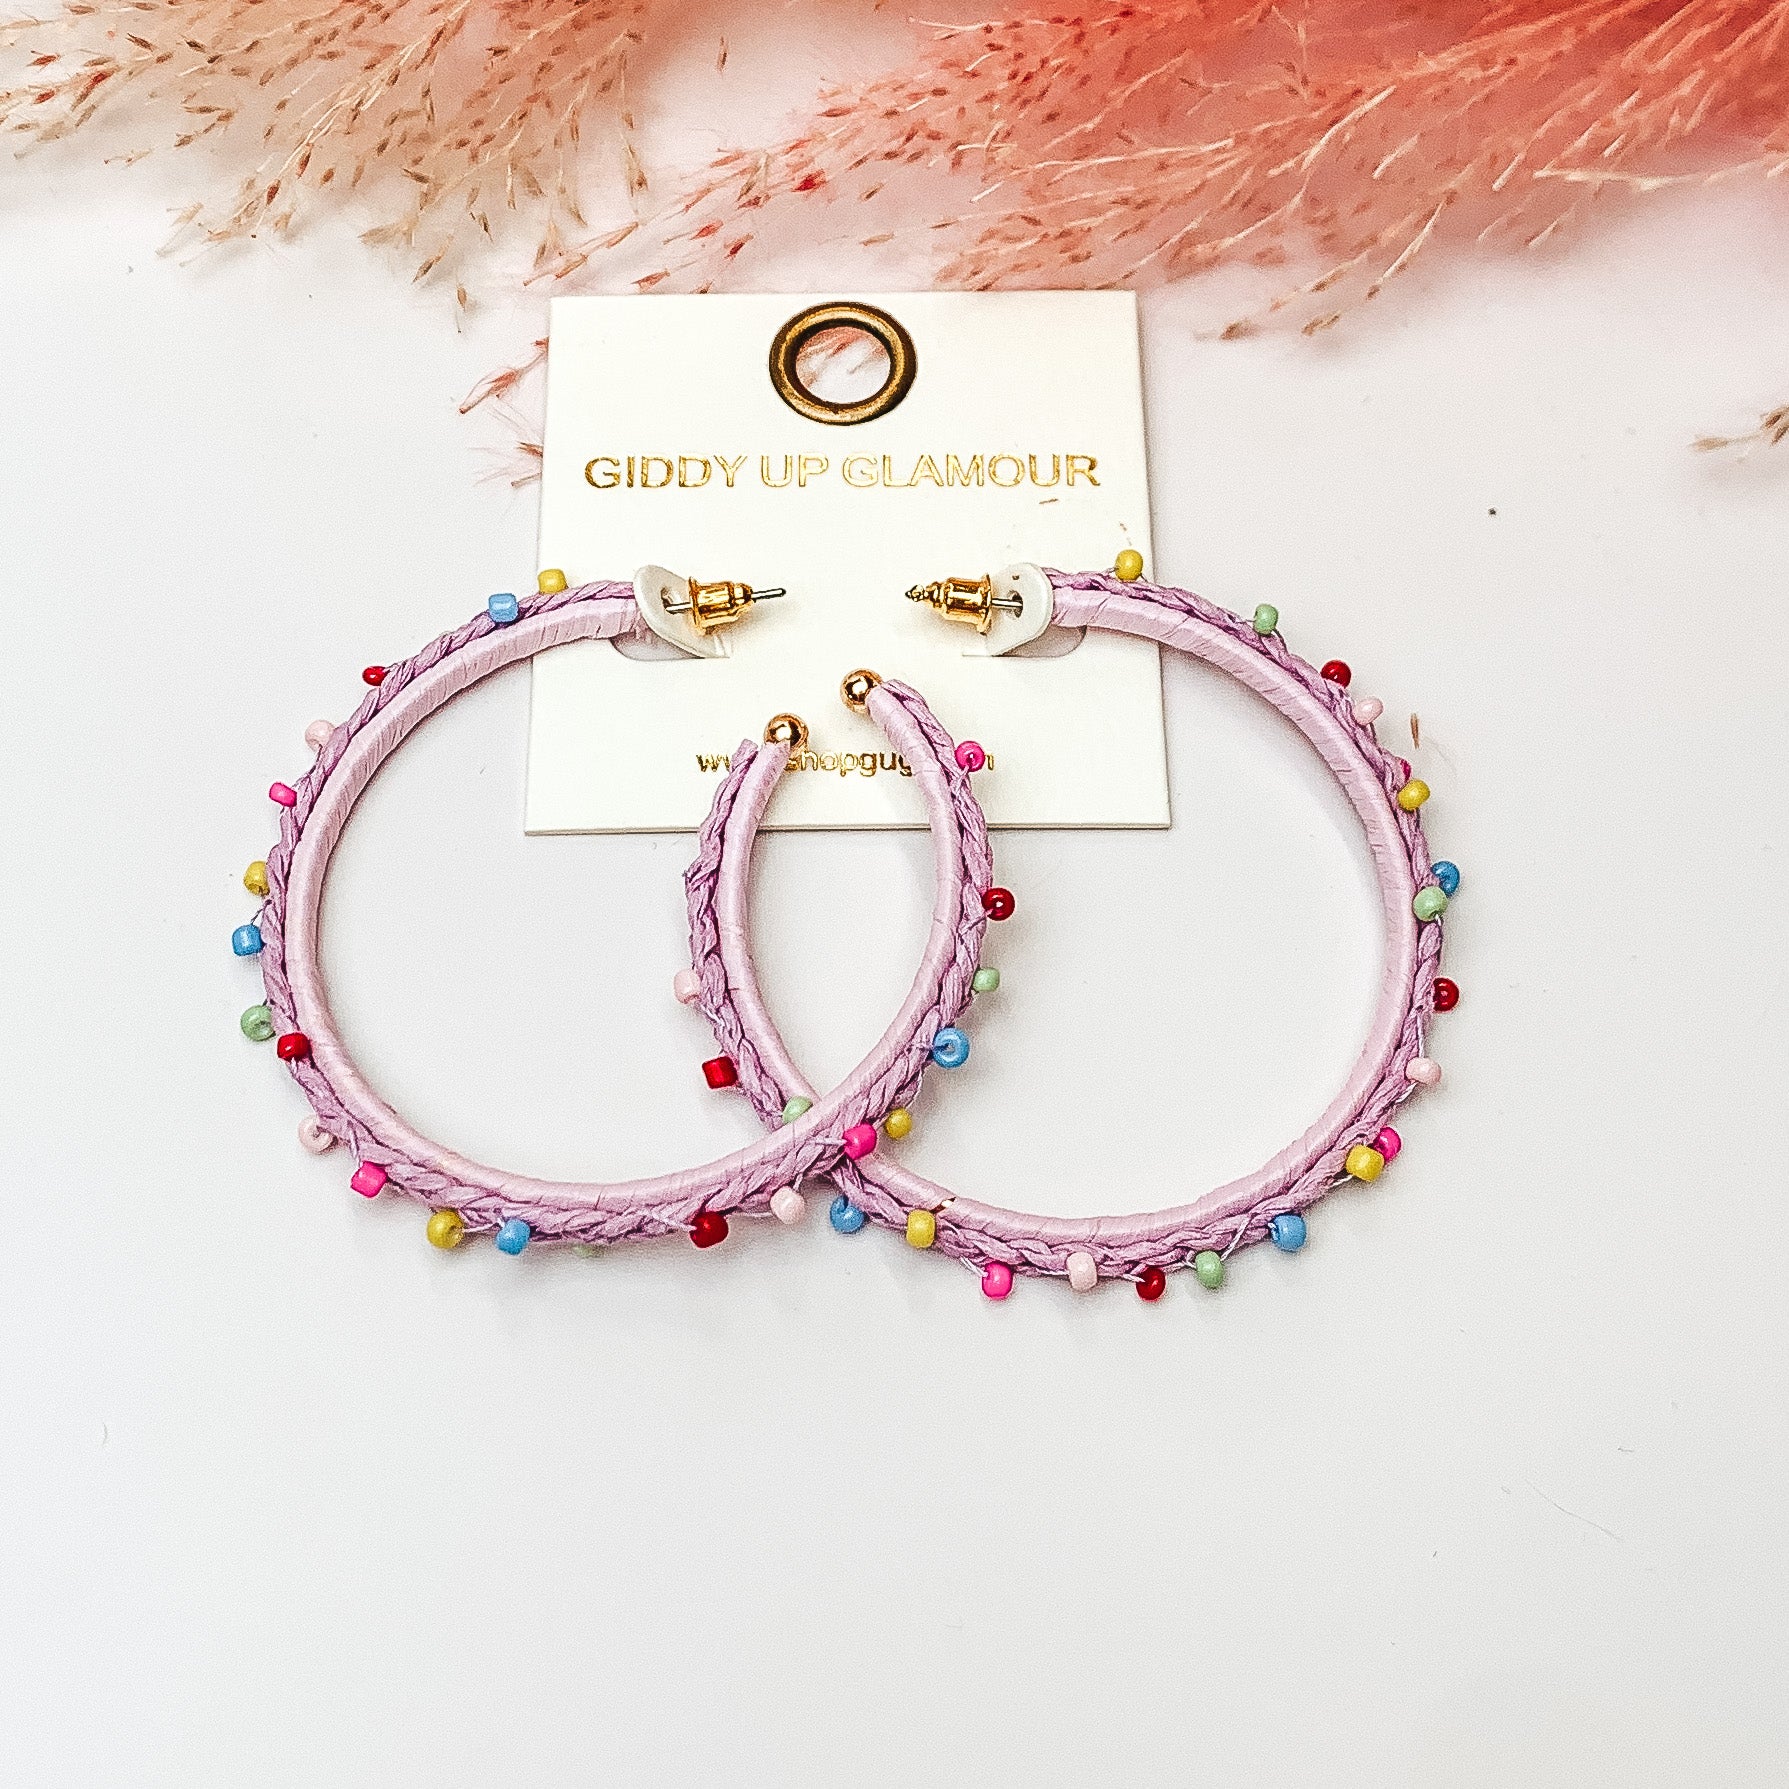 Pictured are raffia braided hoop earrings in lavendar with colorful beads. They are pictured with a pink feather on a white background.